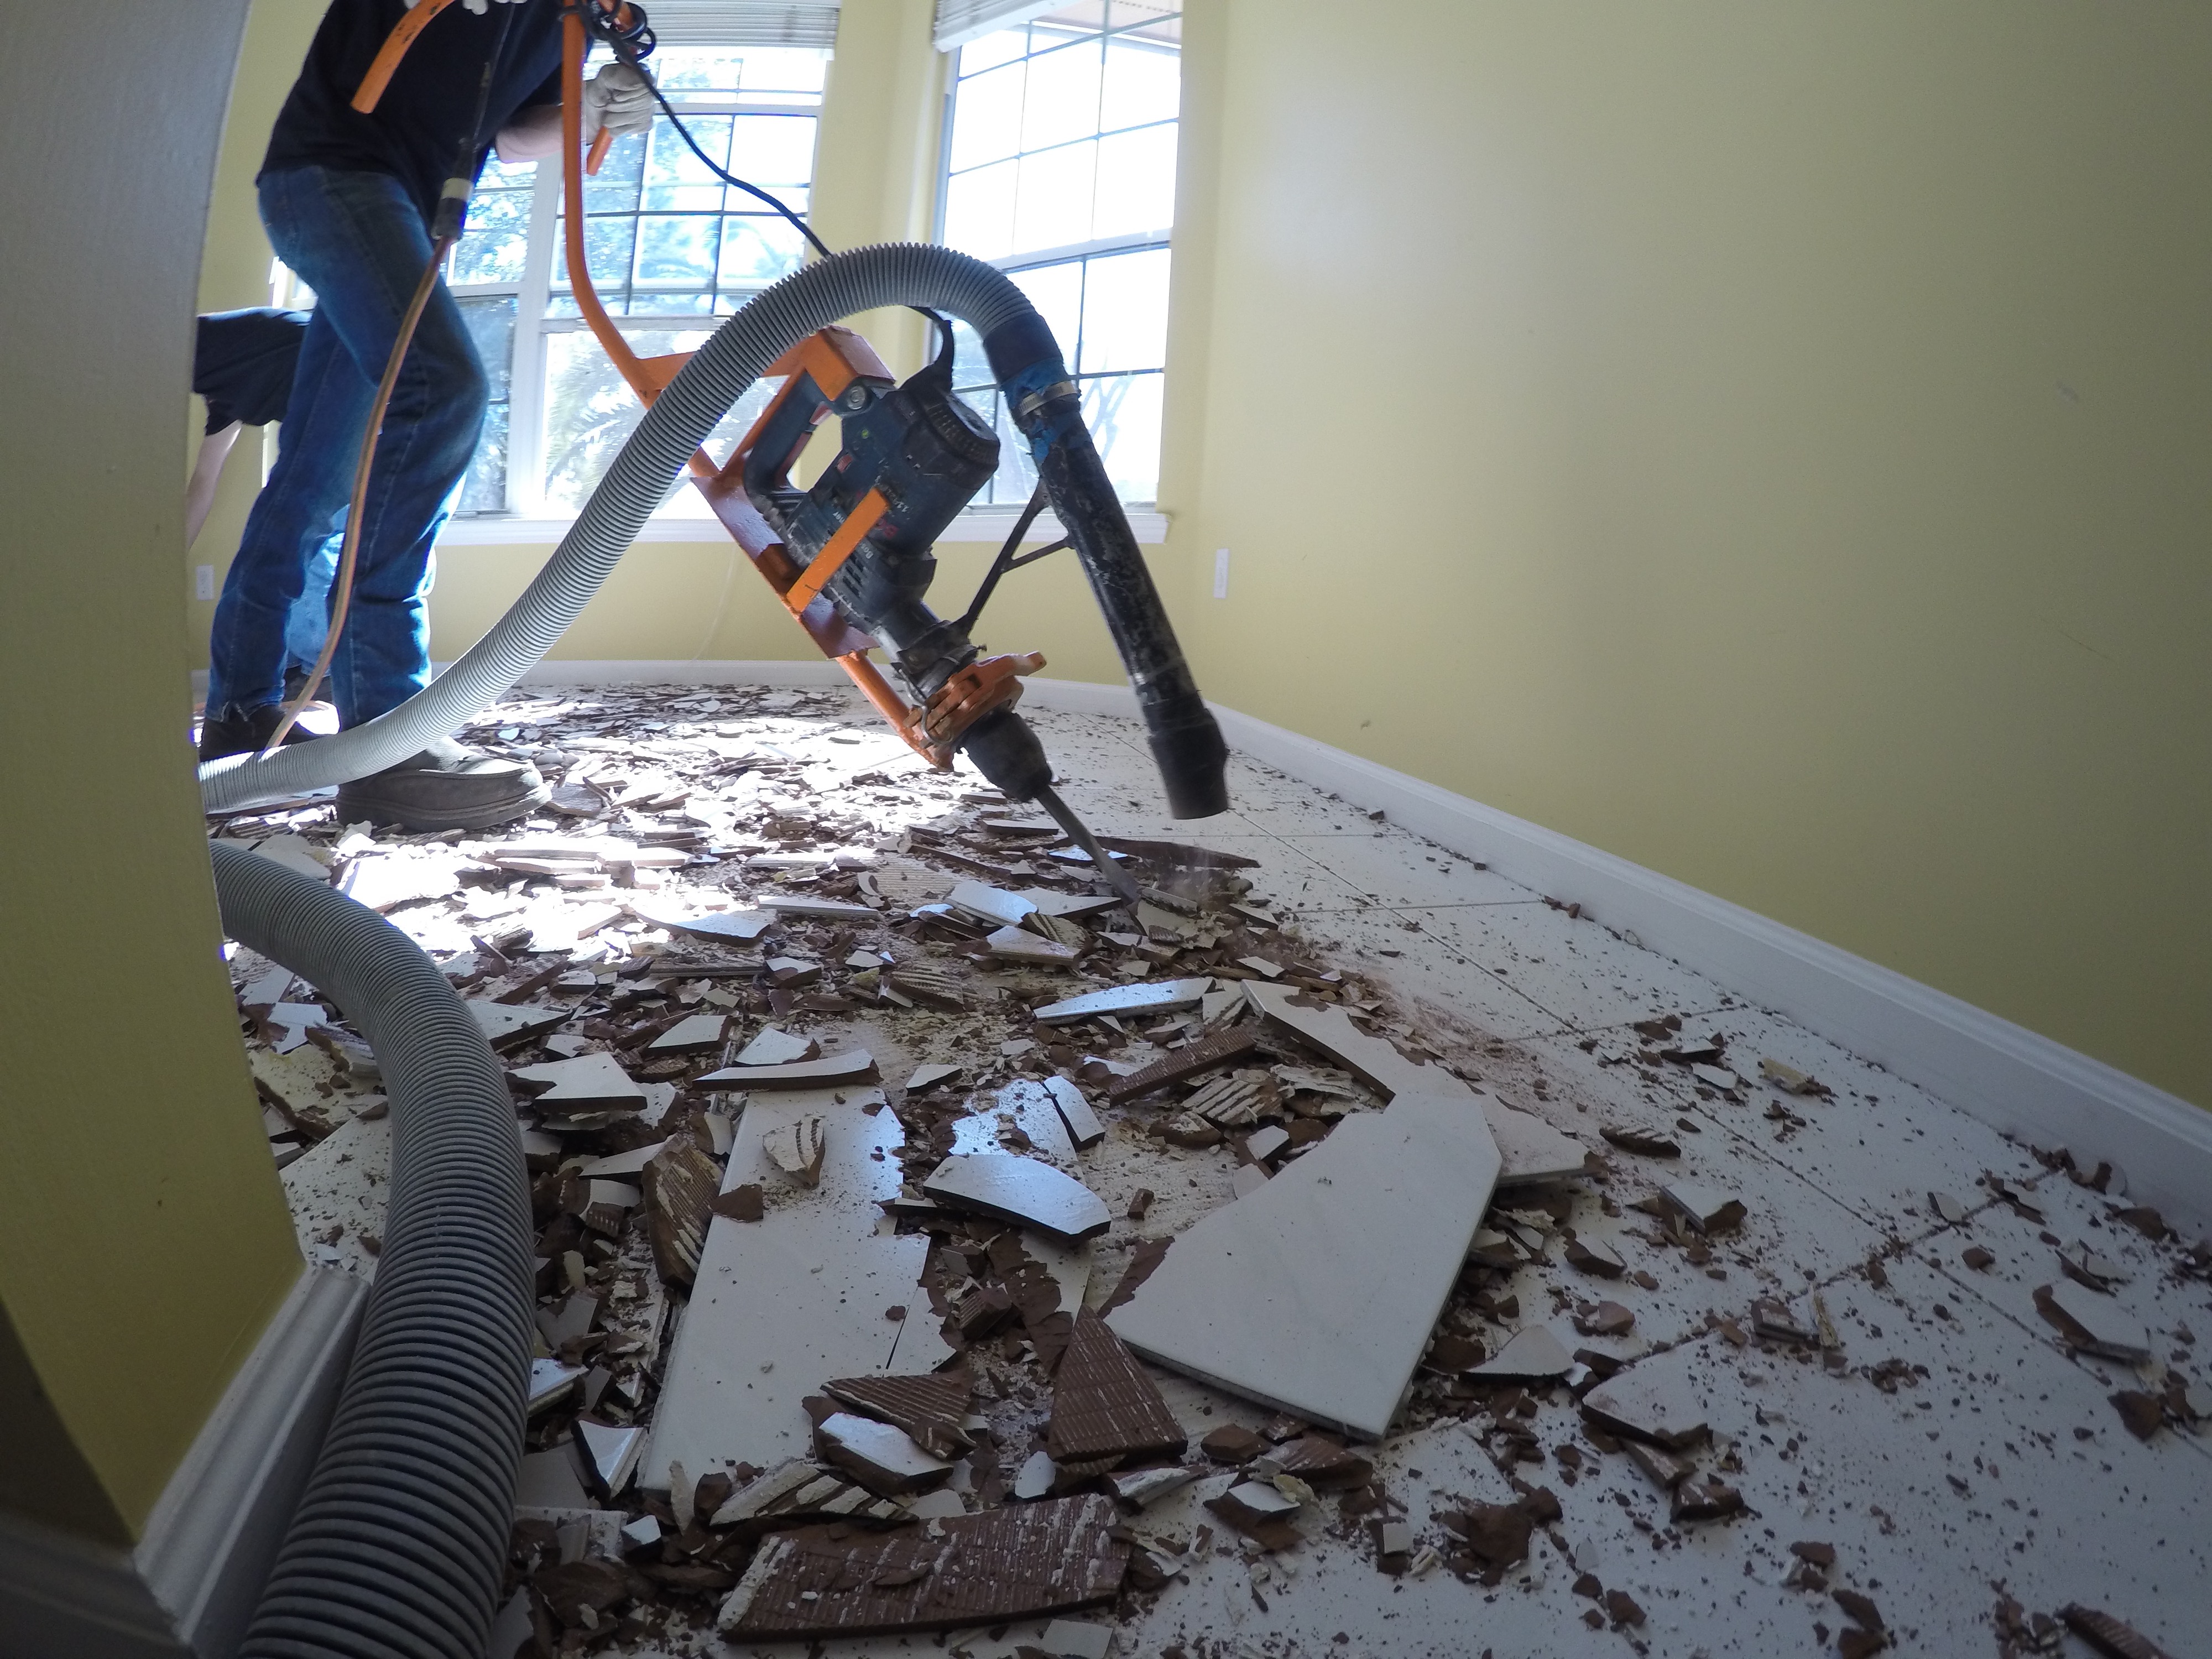 Tile Removal The Easy Way Sdy, How To Replace Tile Floor